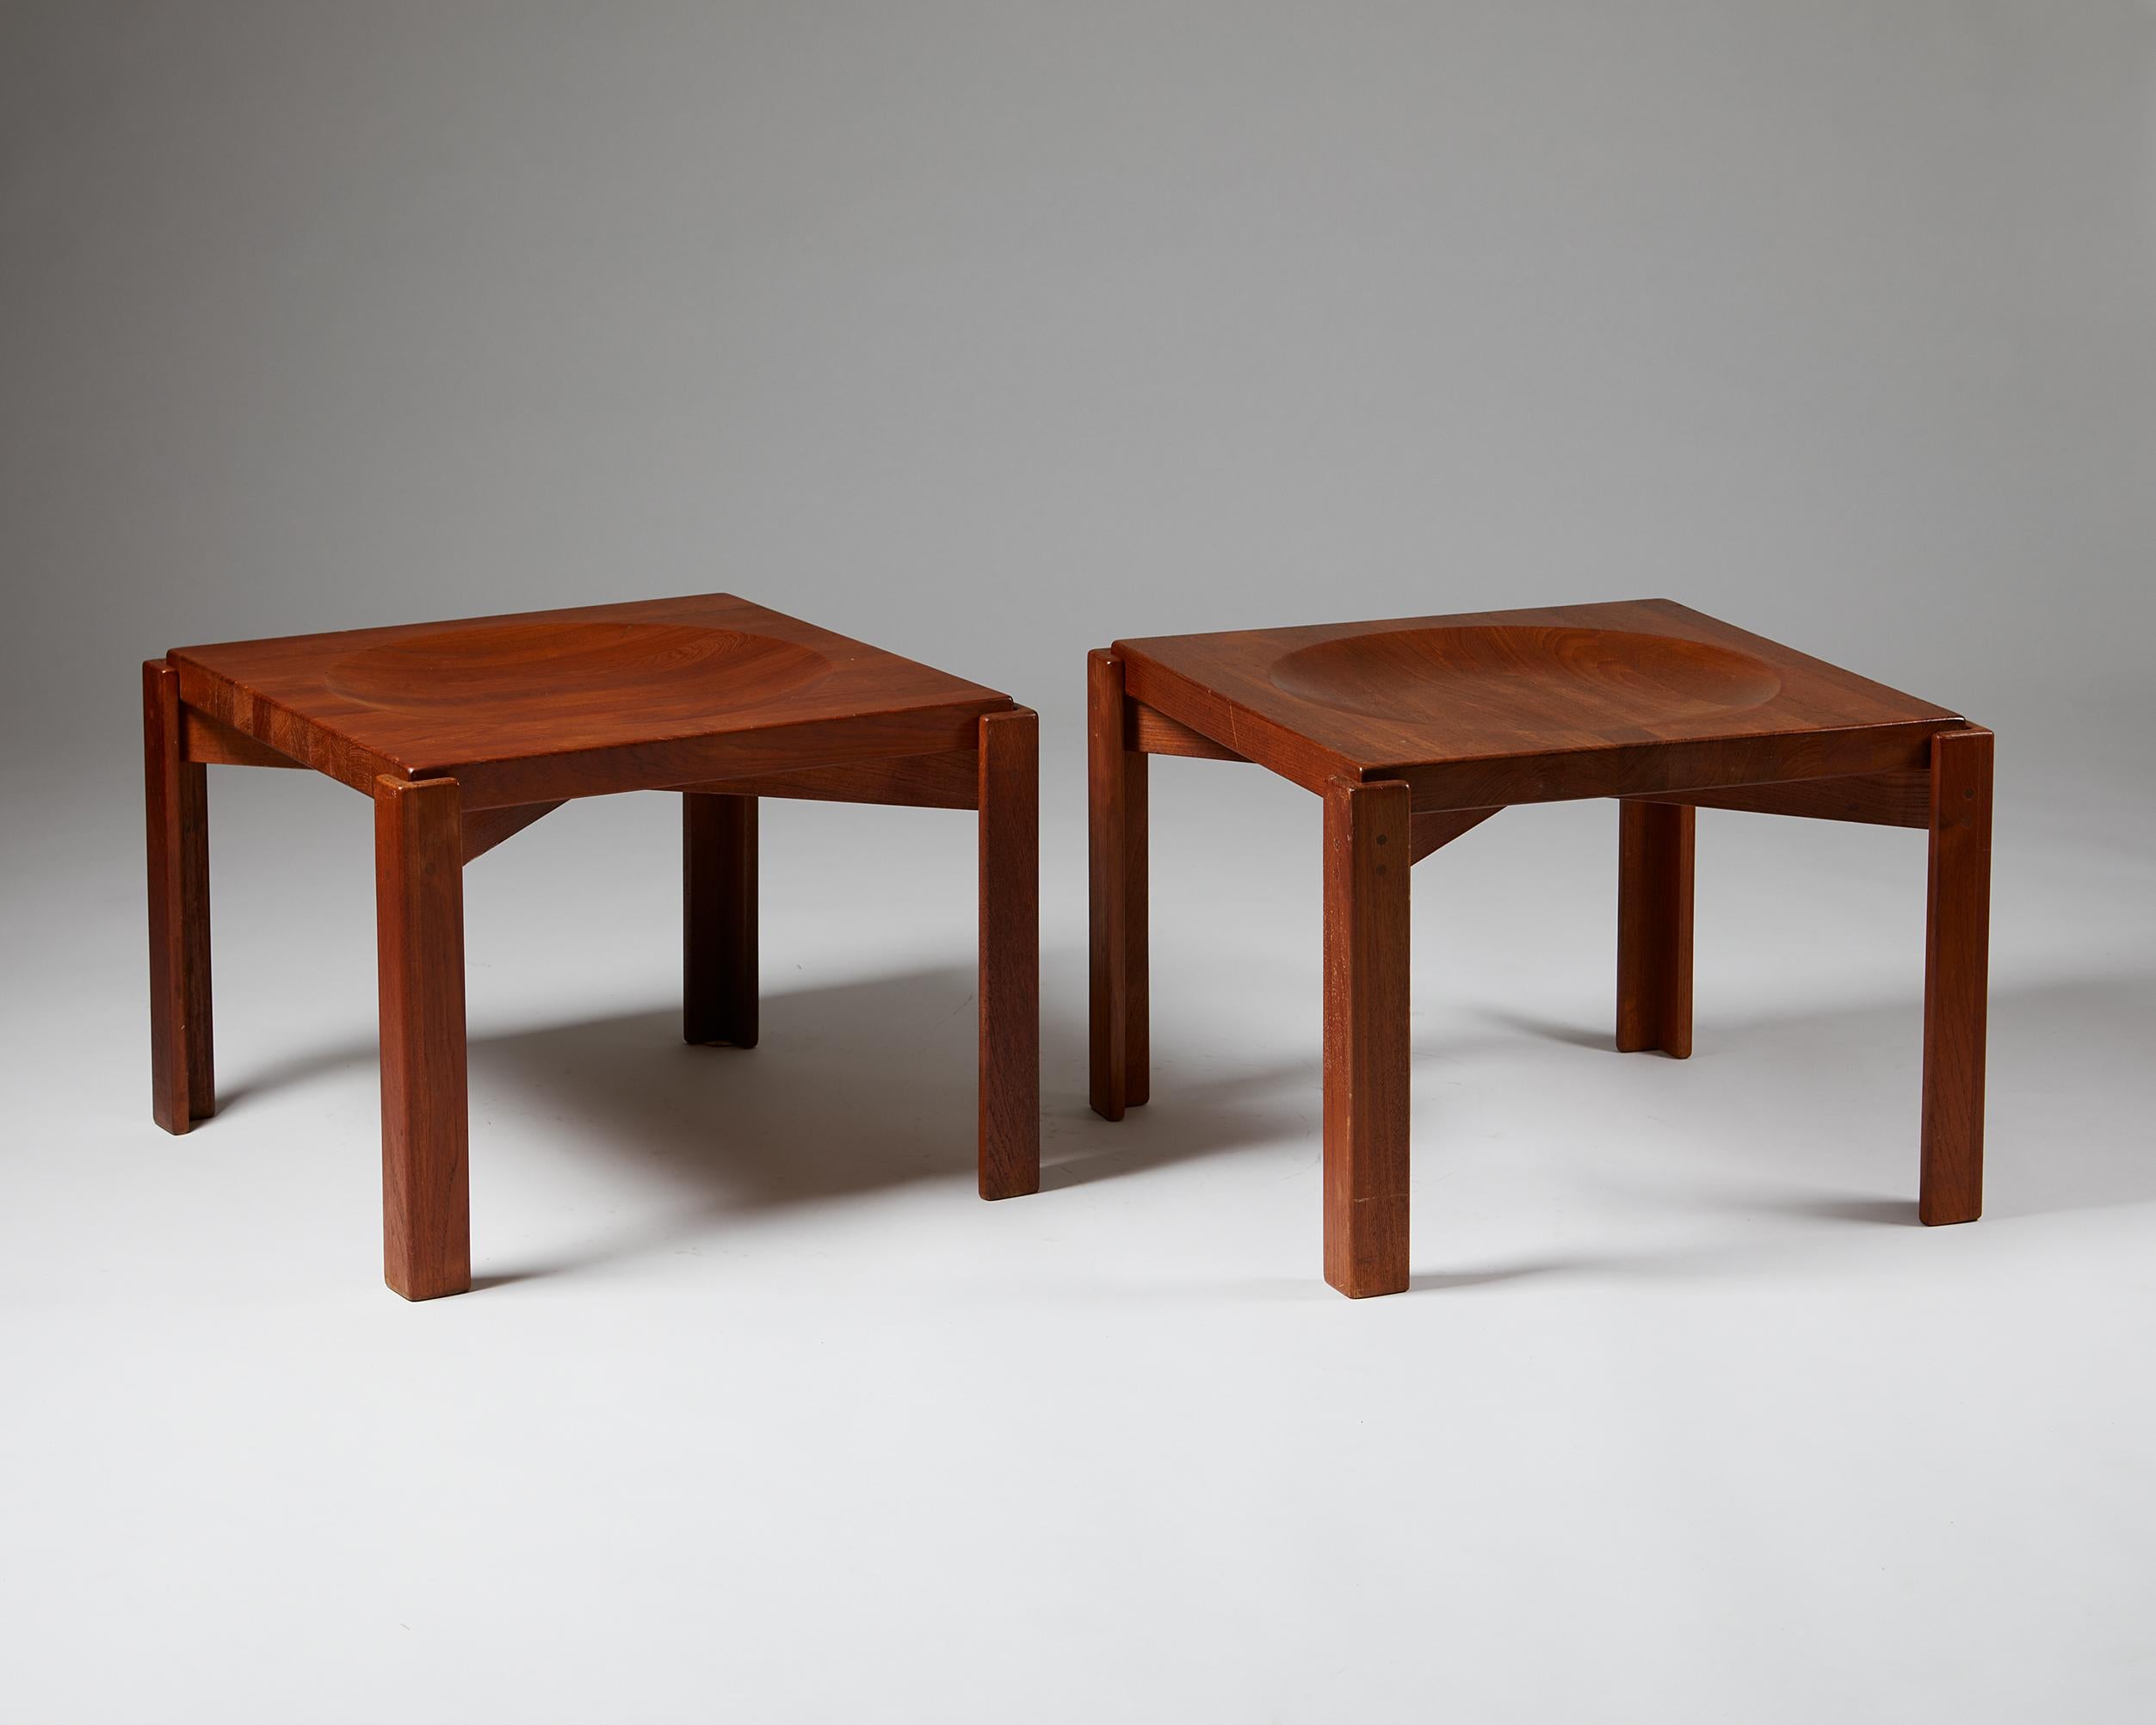 Pair of tray tables designed by Jens Quistgaard,
Denmark, 1950s.

Solid teak.

Measurements:
W: 62 cm / 2' 3/4